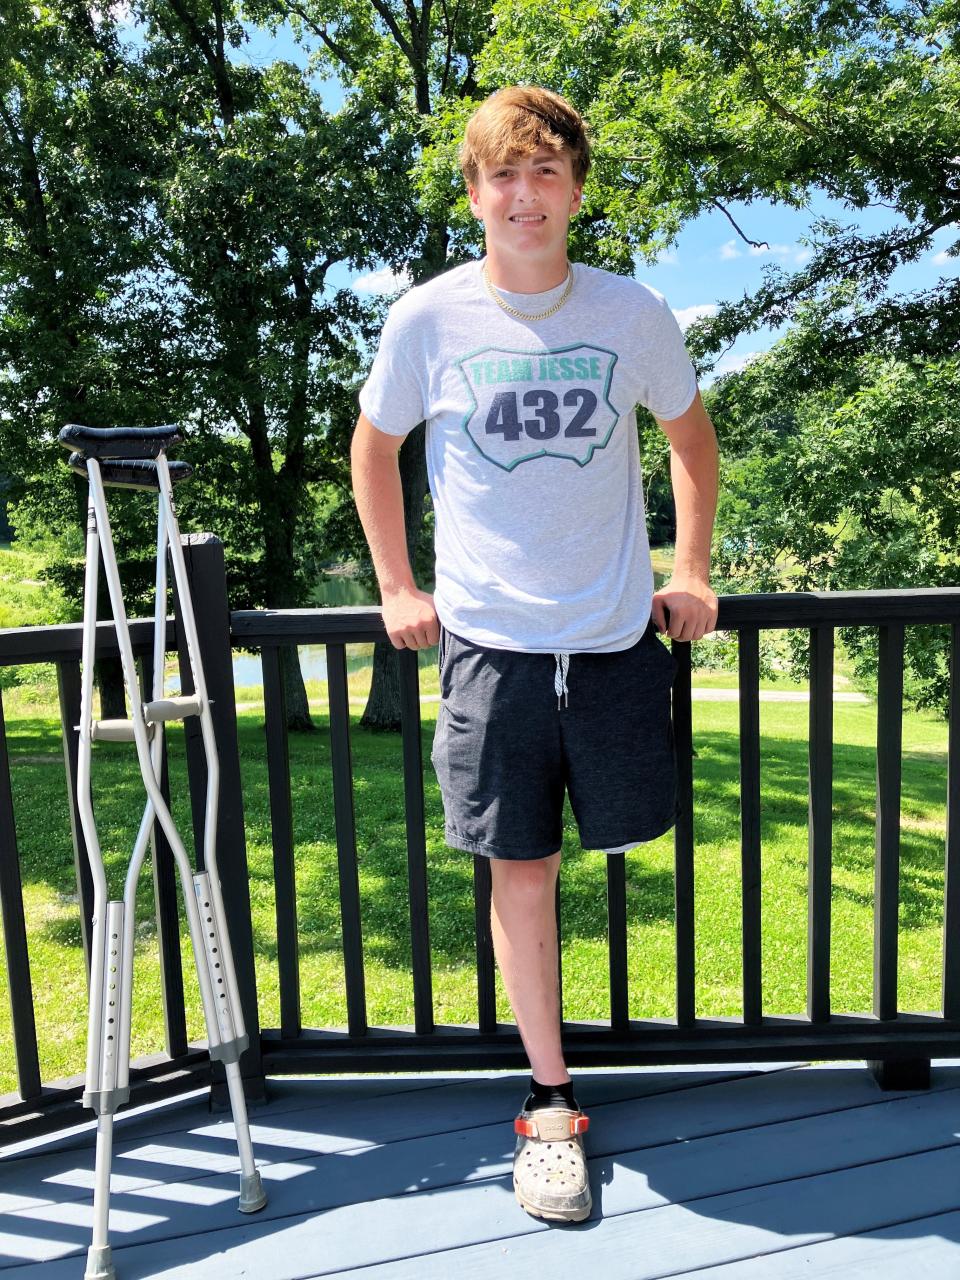 West Muskingum student Jesse Savage, 15, recently underwent amputation surgery as the result of a motorcyle crash on June 18 at Grear's Motorsports Park near Zanesville. Savage underwent three surgeries in six days at Nationwide Children's Hospital in Columbus.